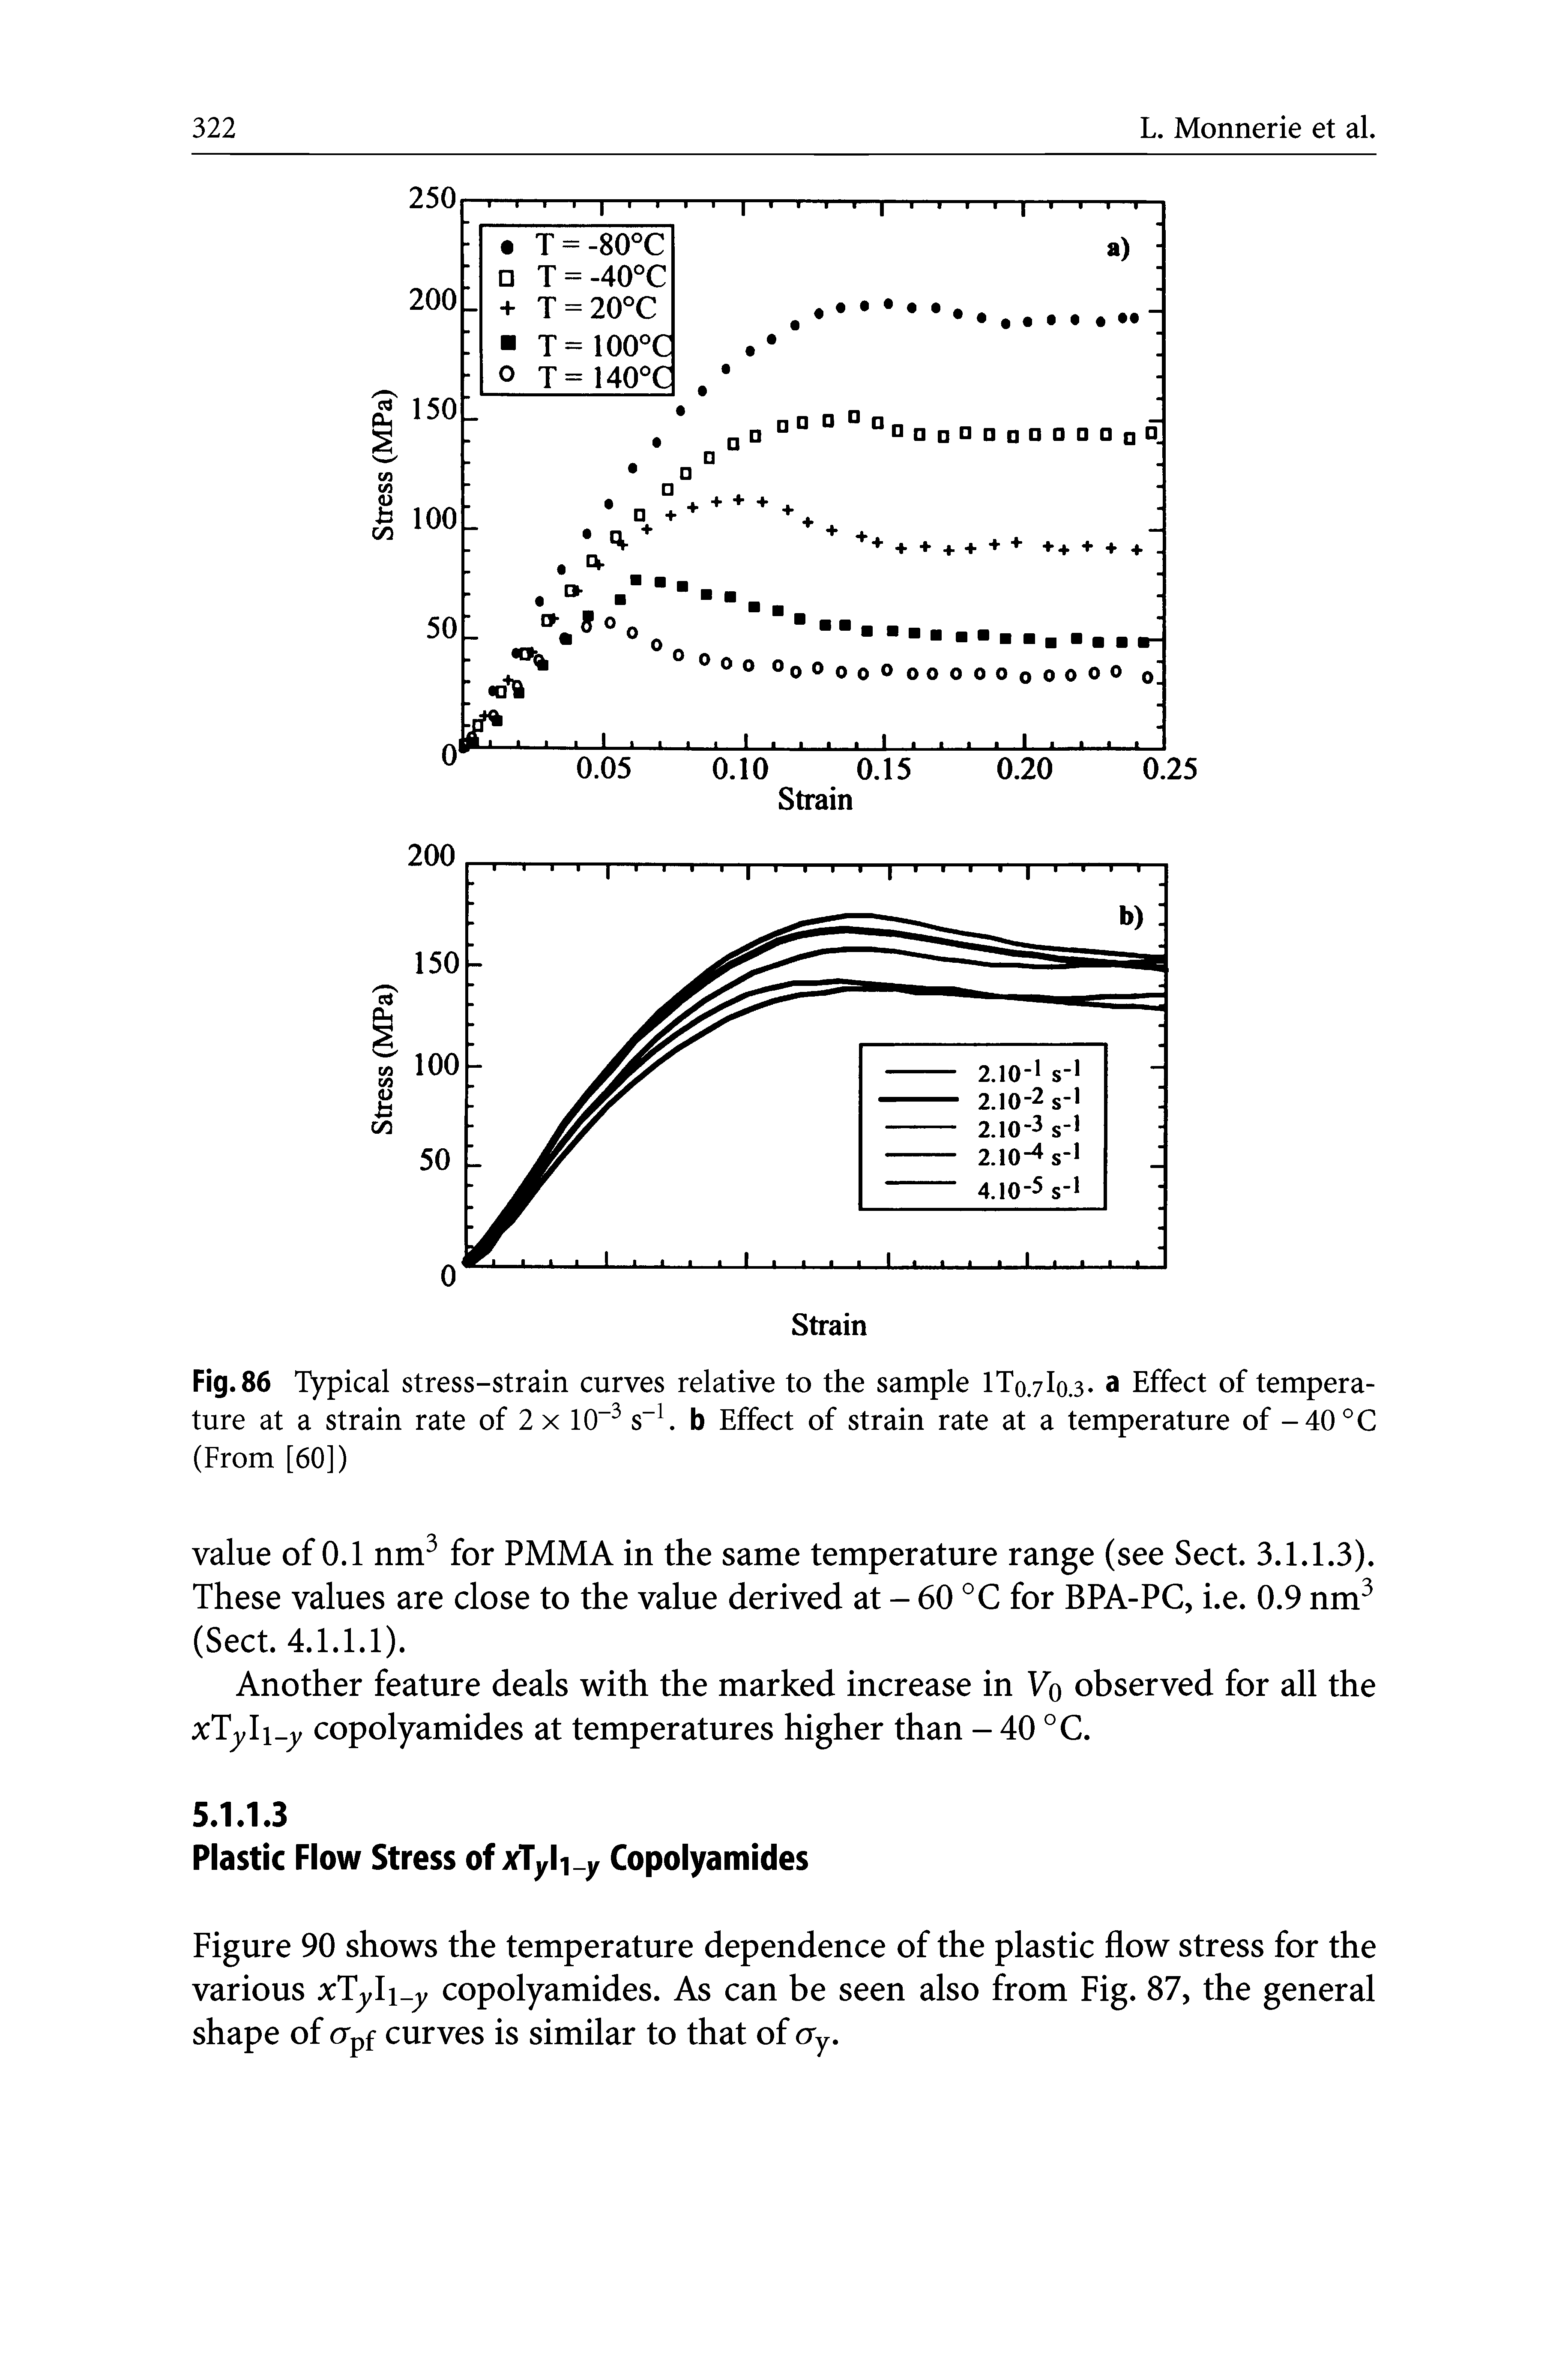 Fig. 86 Typical stress-strain curves relative to the sample IT0.7I0.3. a Effect of temperature at a strain rate of 2 x 10-3 s-1. b Effect of strain rate at a temperature of -40°C (From [60])...